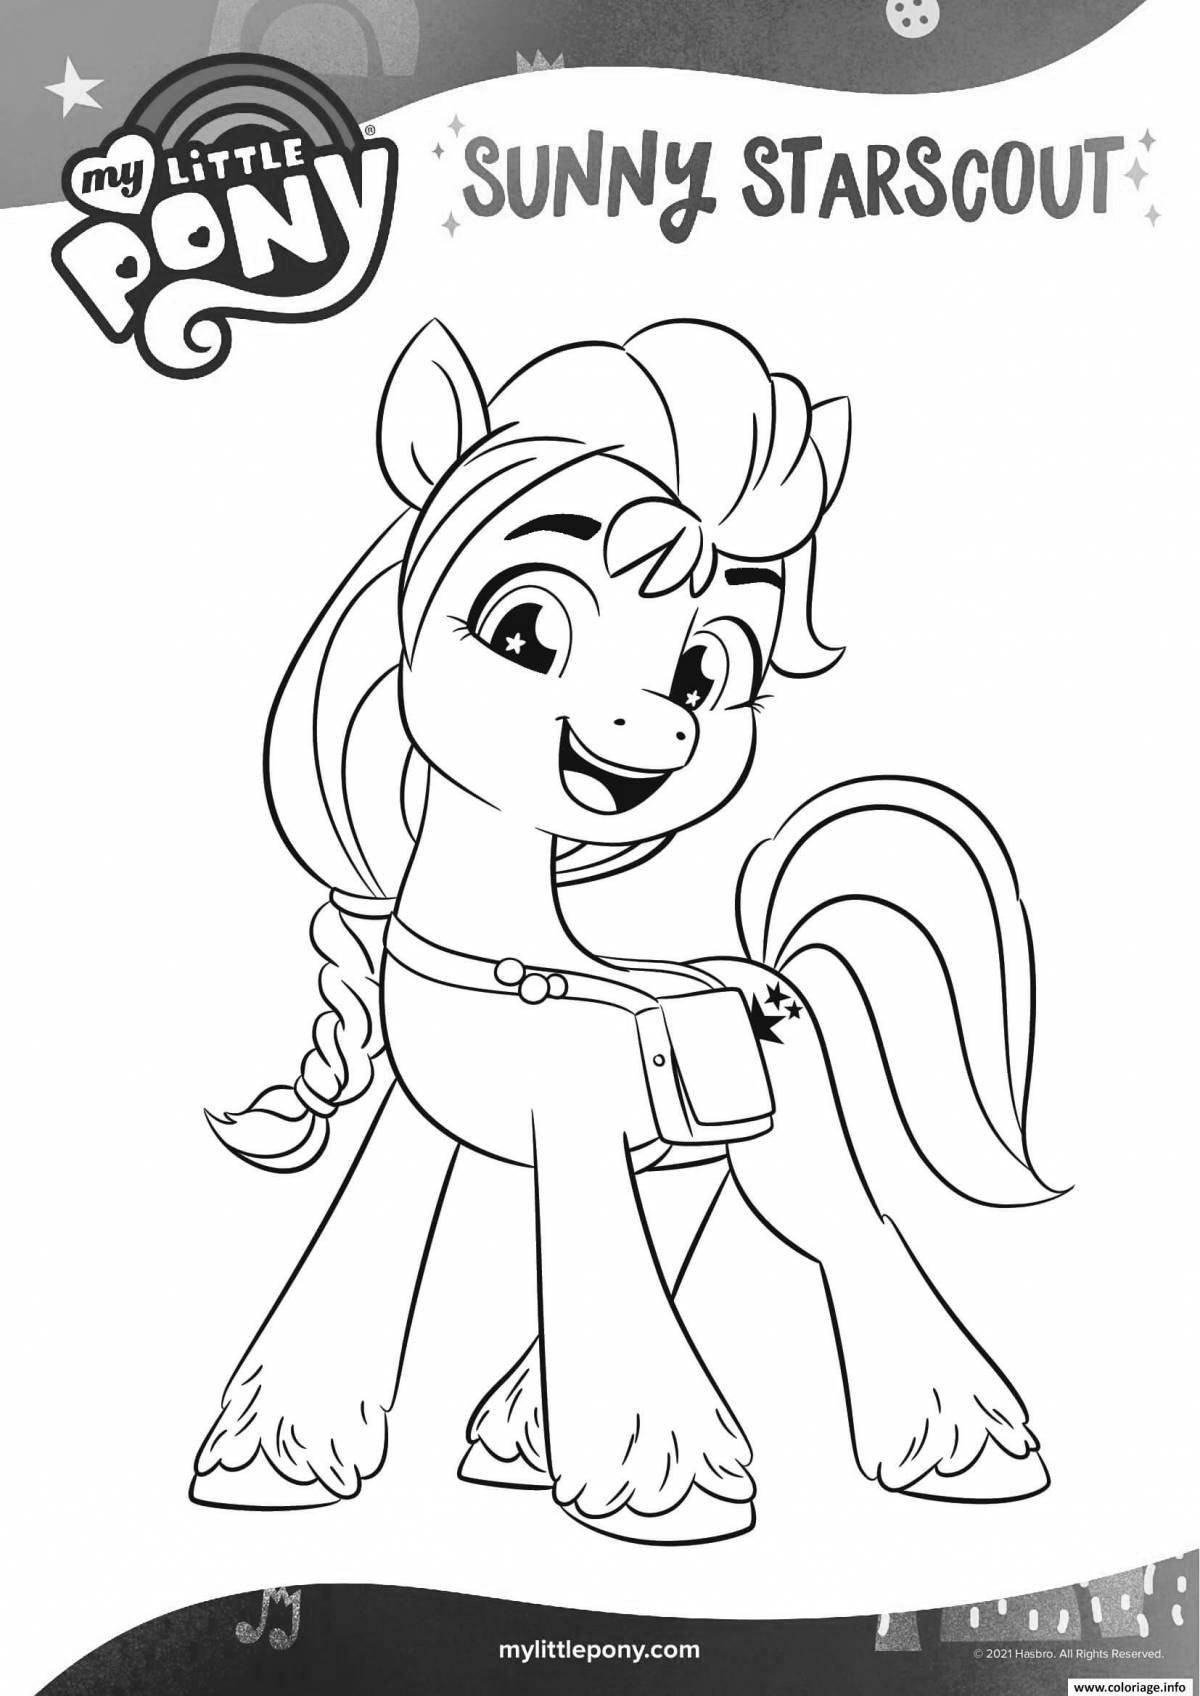 Cute pony coloring